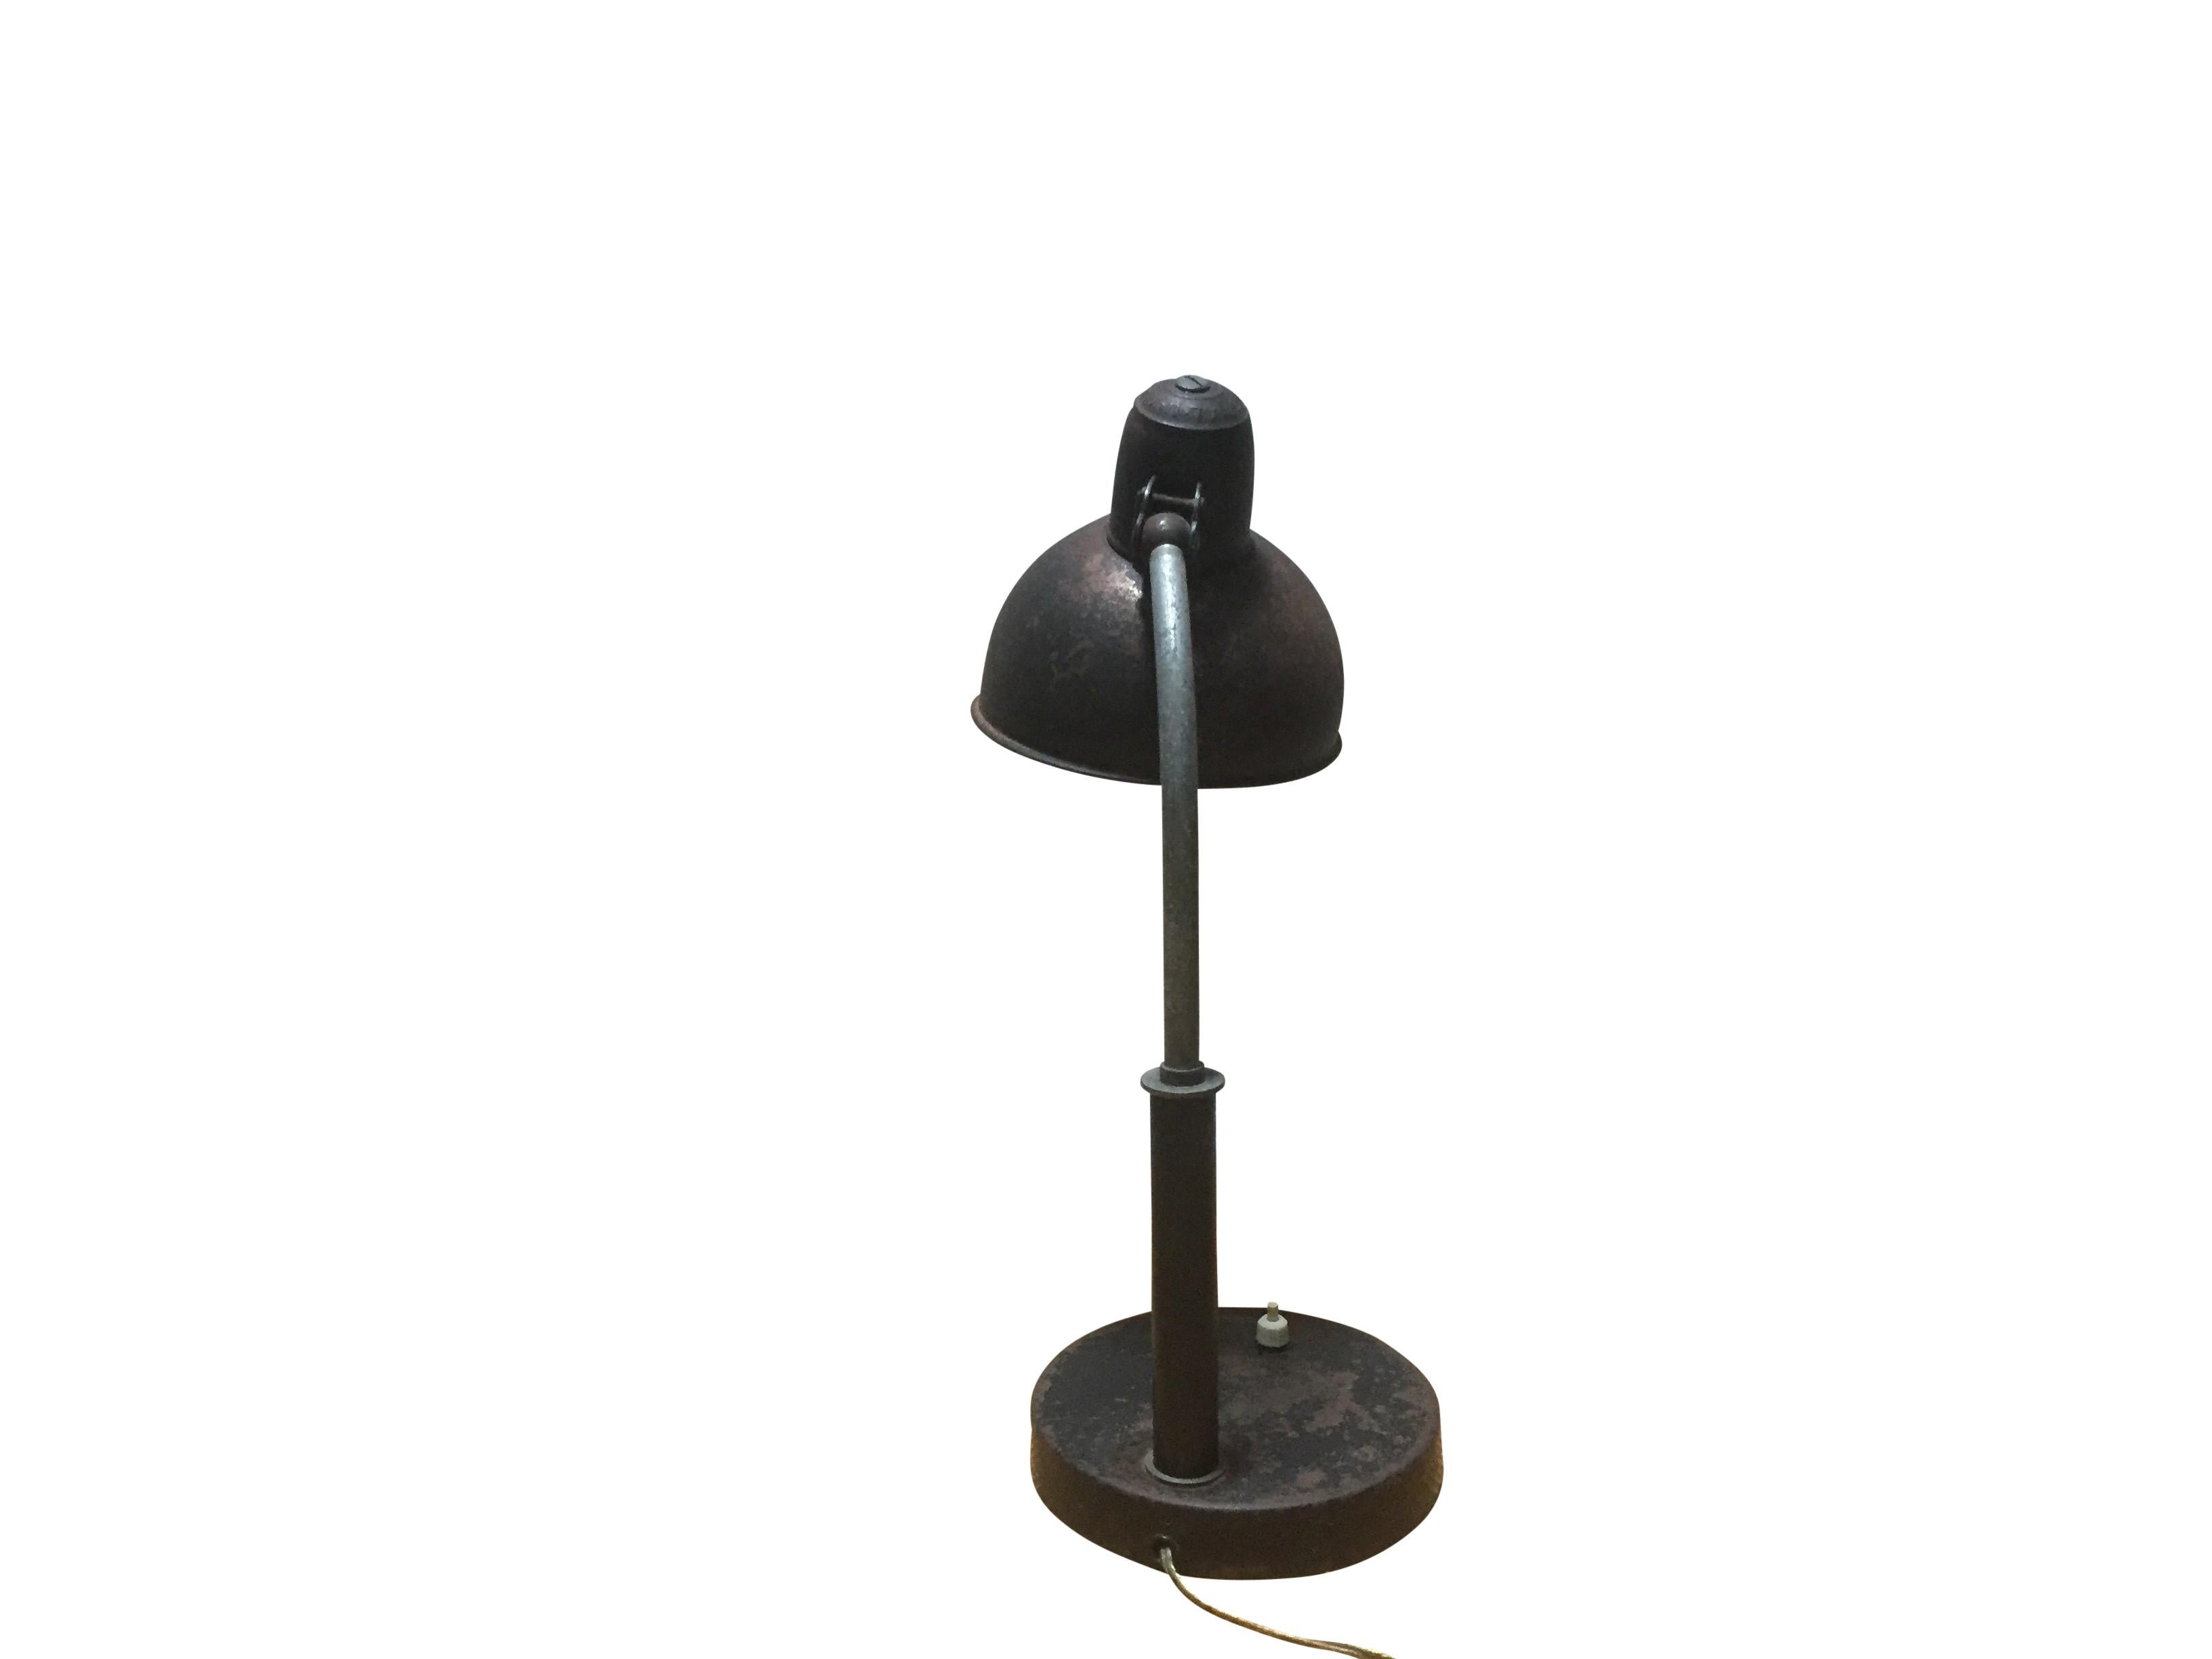 The Kaiser Idell lamp is characterized by Christian Dell's ability to create an elegant design with the basic geometric features of modernism. Adjustable neck and shade hold in any position.
The lamp has a beautiful patina and a nice industrial